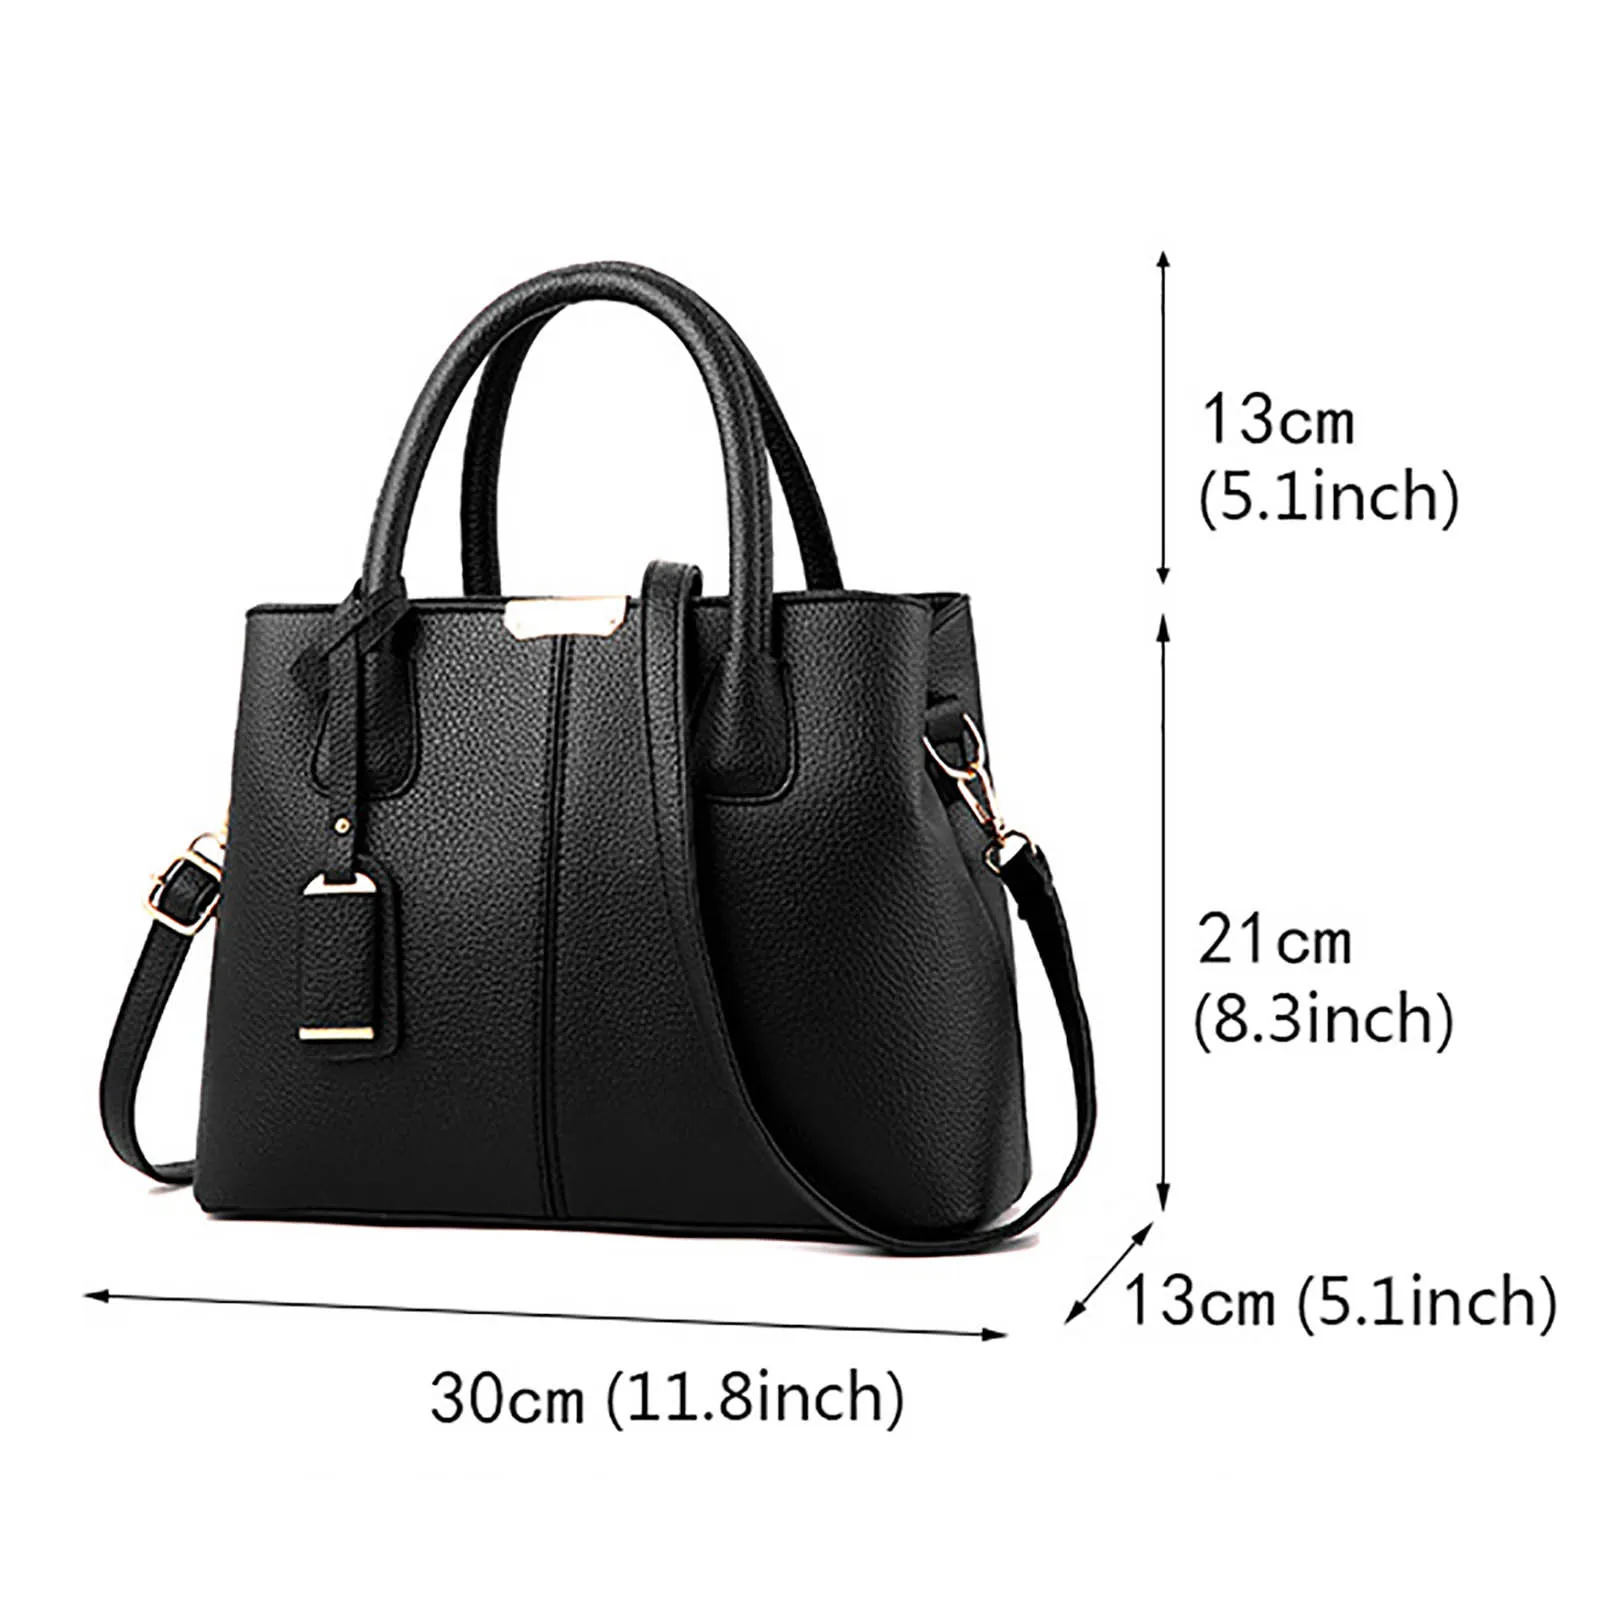 New In Handbags For Women Clearance Sale Handbag For Women Roomy Womens Handbags Purse Satchel Shoulder Bags Tote Leather Bag